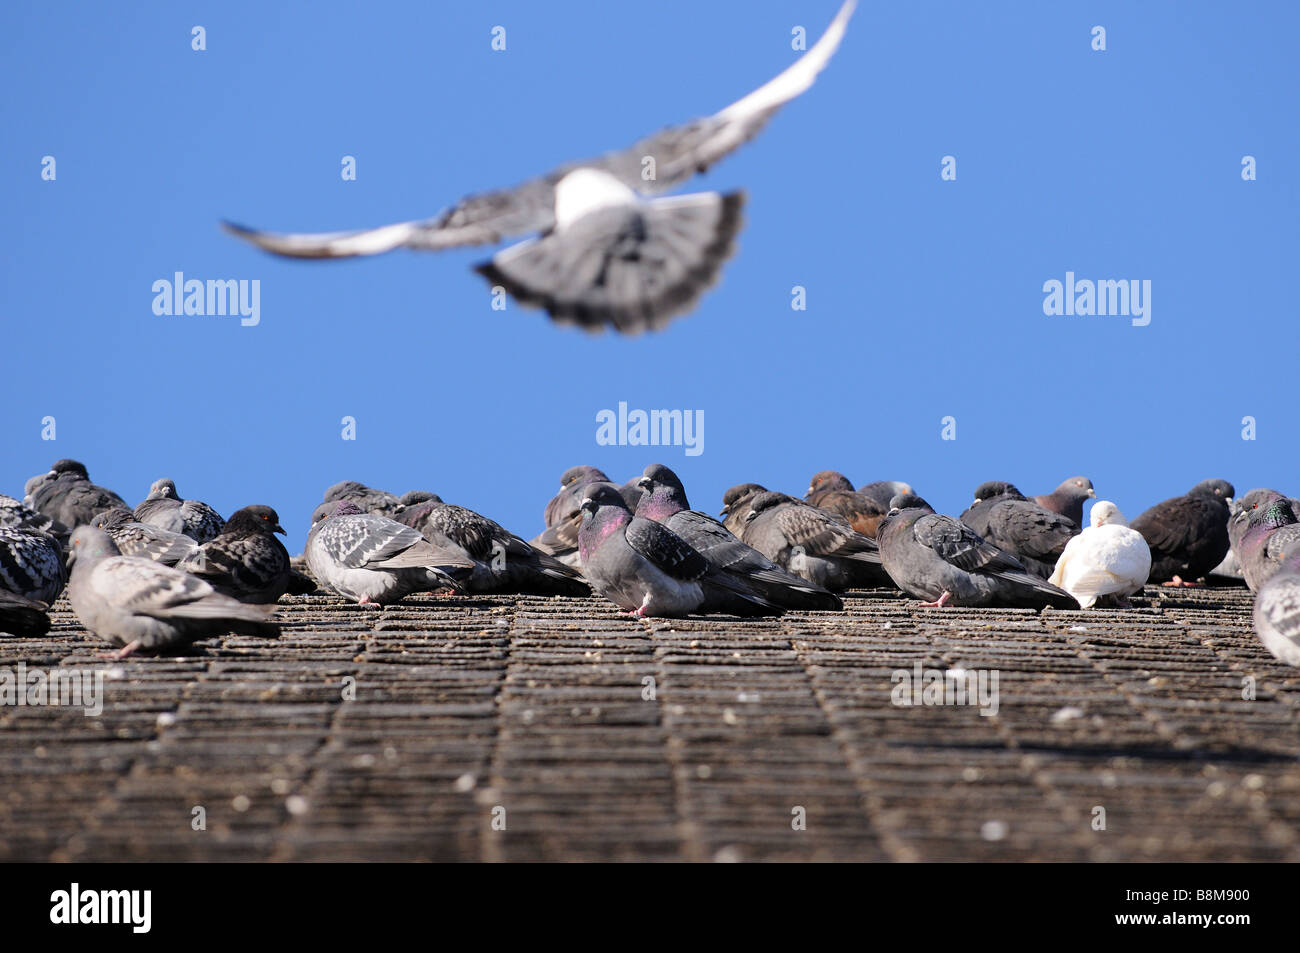 Pigeons, birds sitting on the tar shingle roof on a cold Canadian winter day, as one bird takes flight leaving the others behind Stock Photo